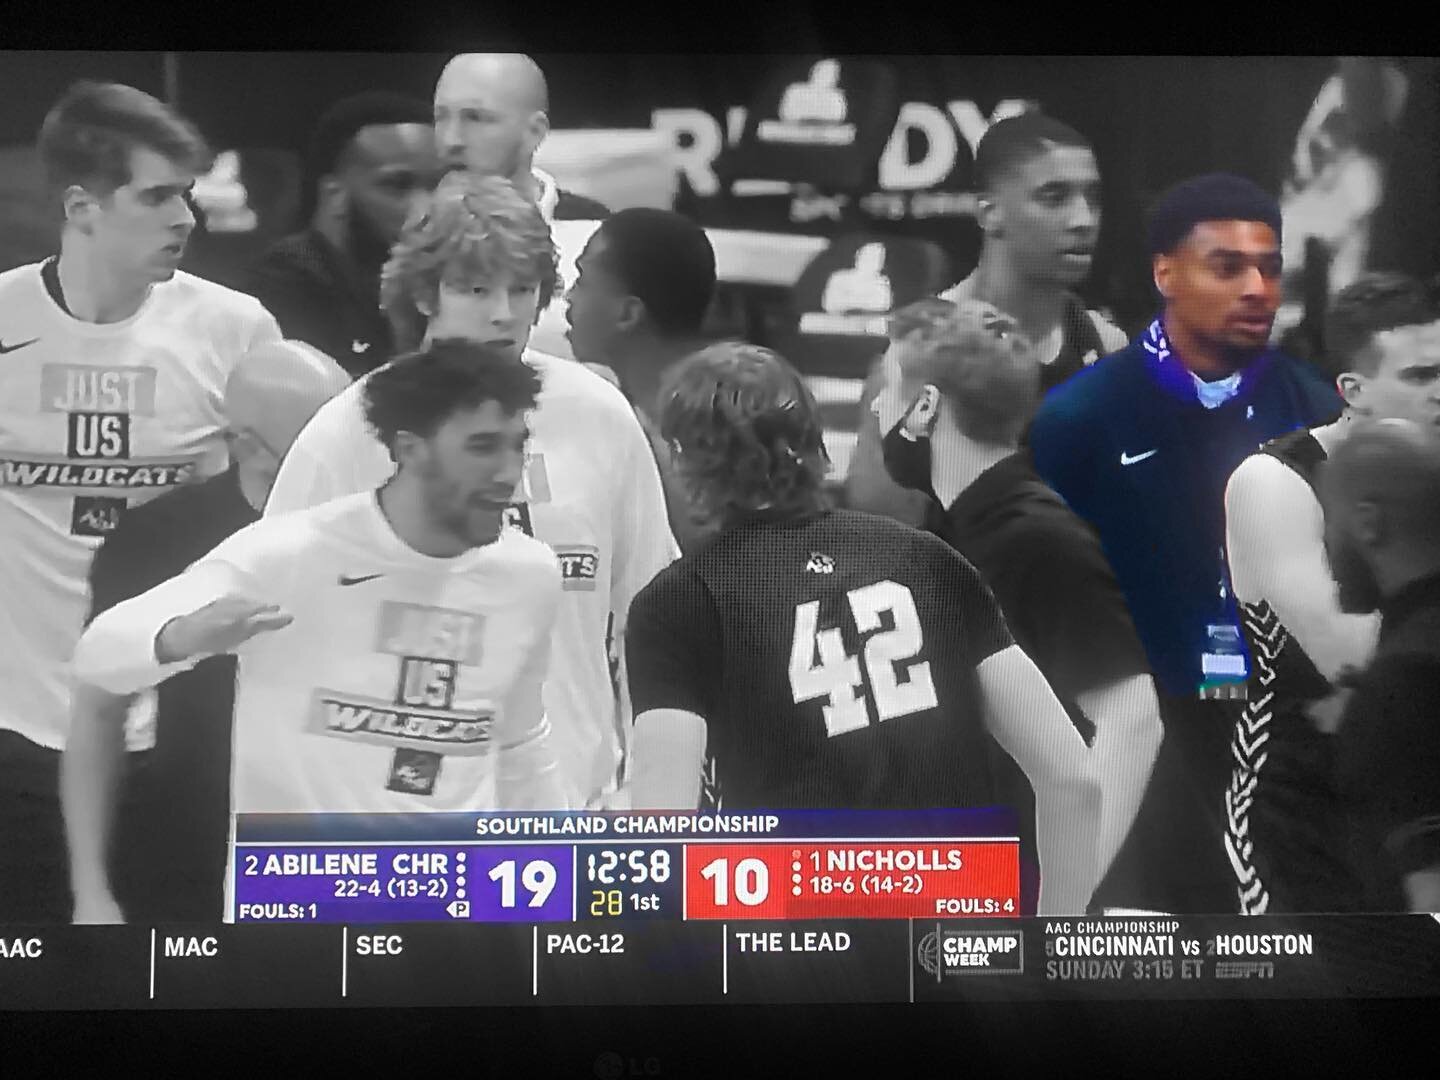 Fun to see two of our favorite players&rsquo; alma maters competing in the Southland Championship. @__gavo from Nicholls and Immanuel who is currently playing at Abilene Christian. These two put in major work at TPF this summer and went at each other